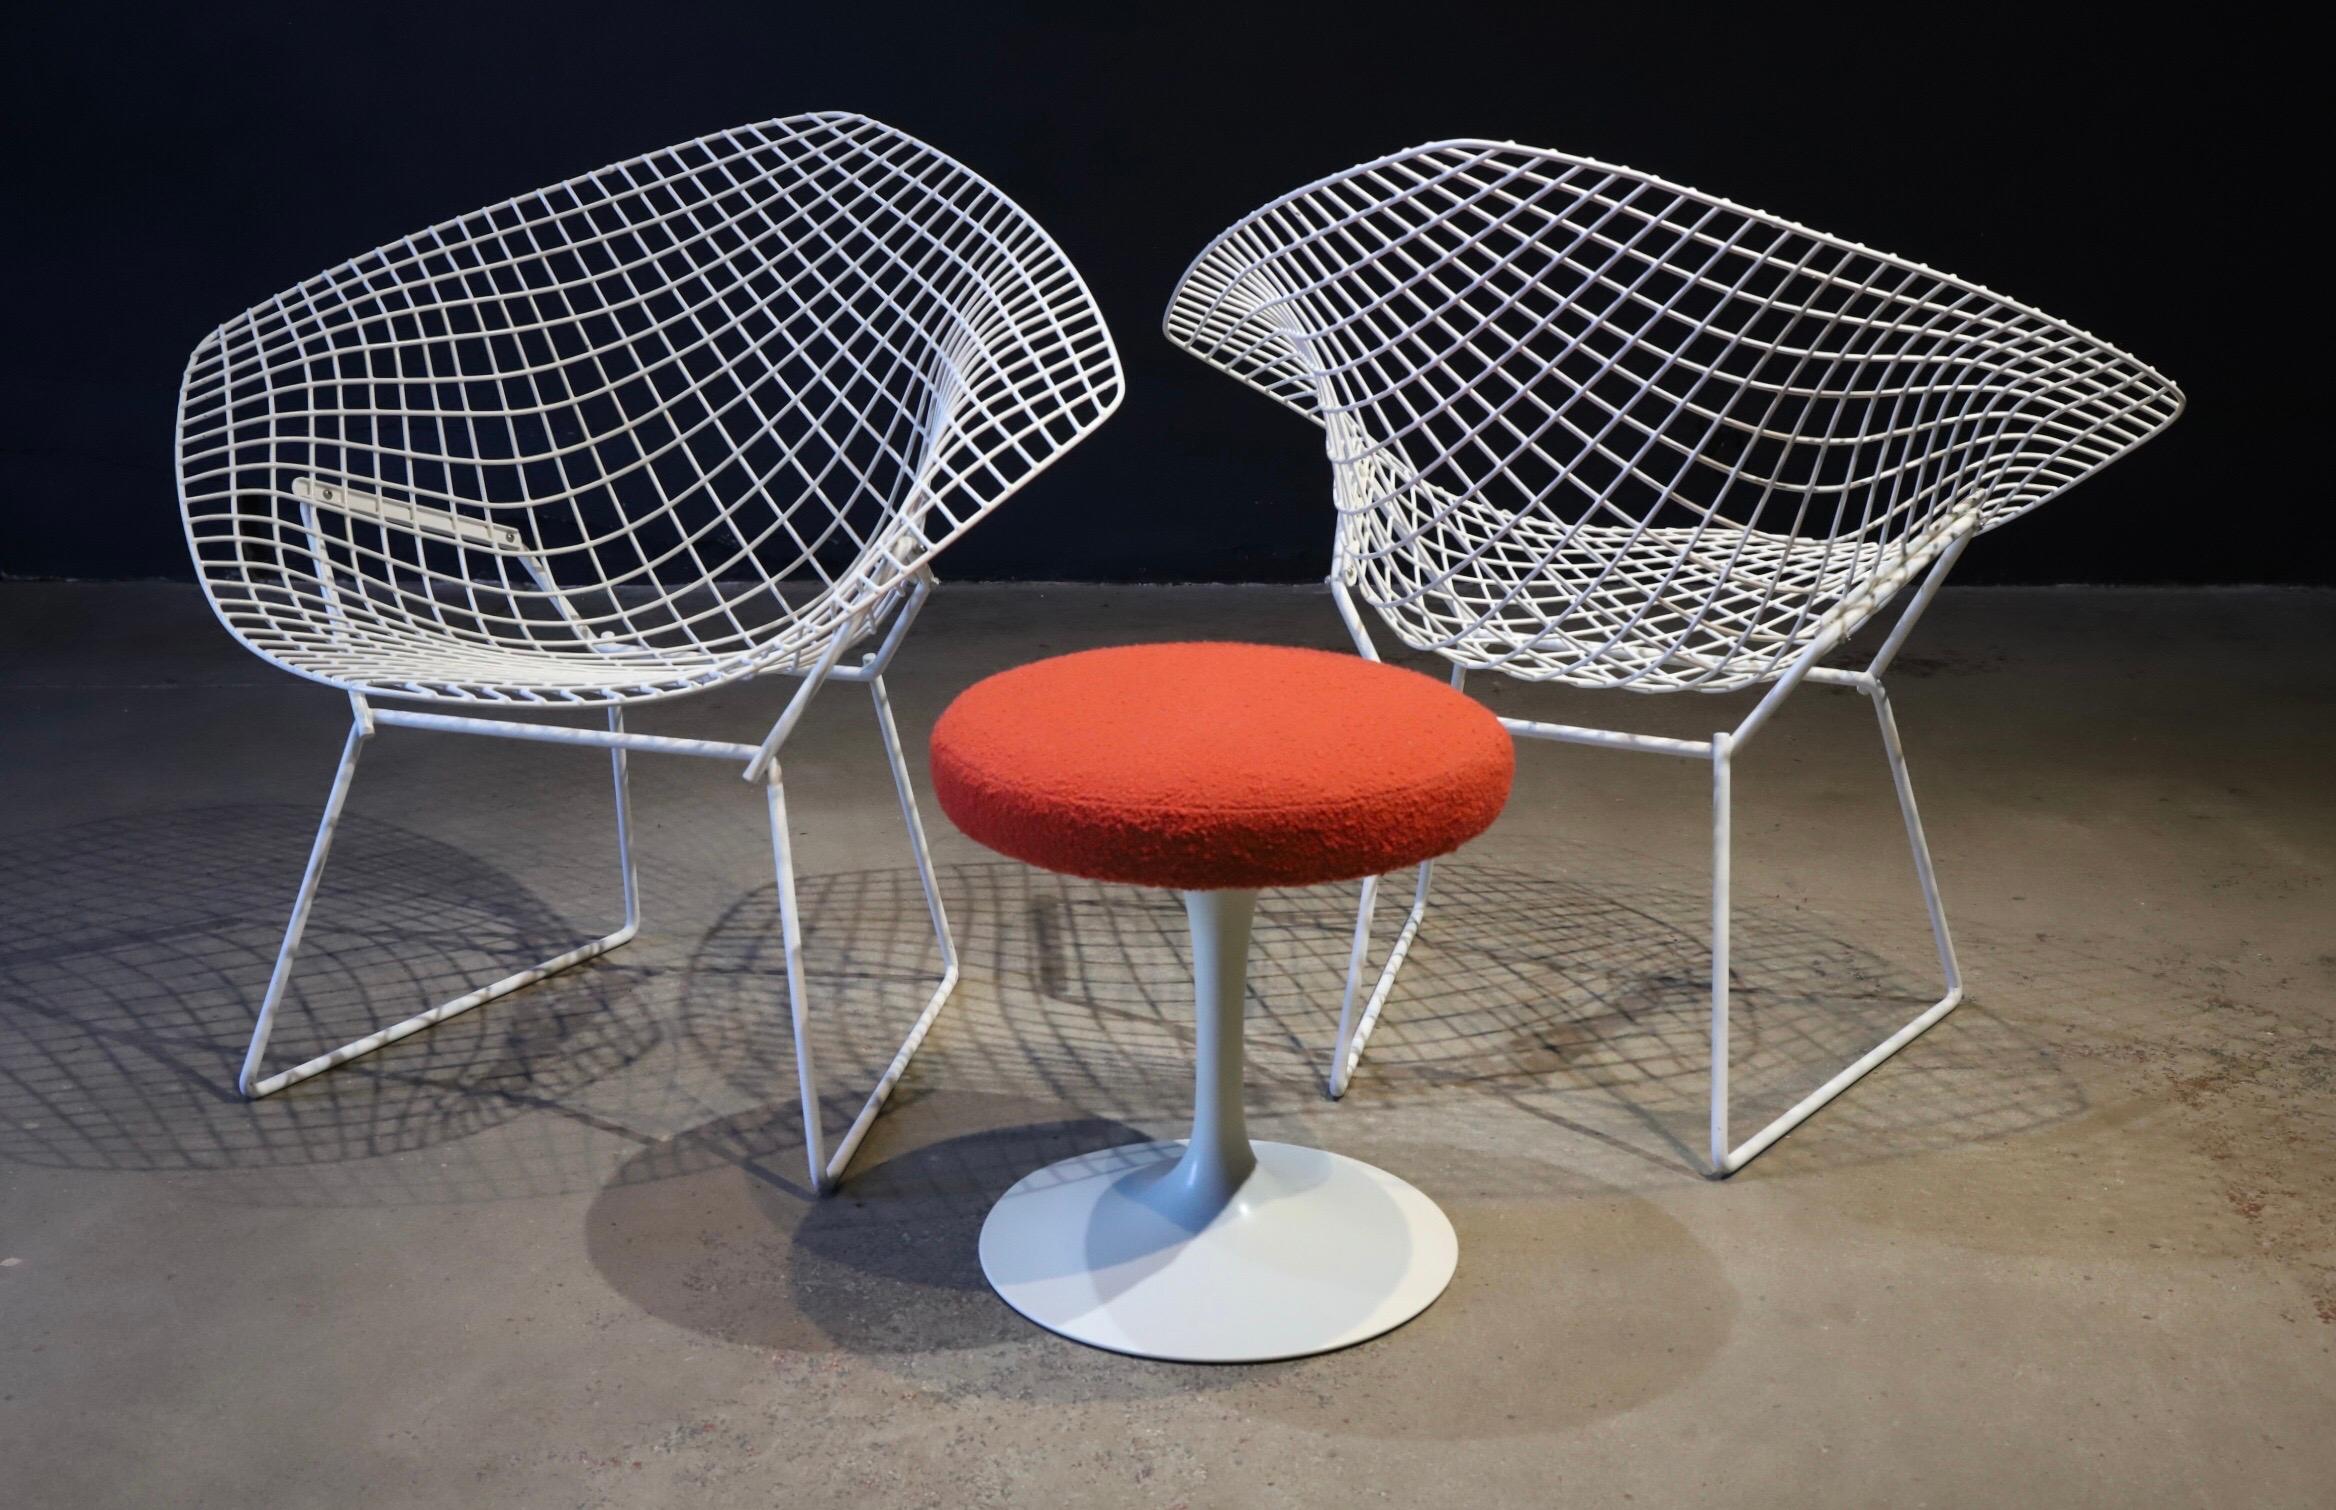 North American Pair of Diamond Chairs by Harry Bertoia for Knoll